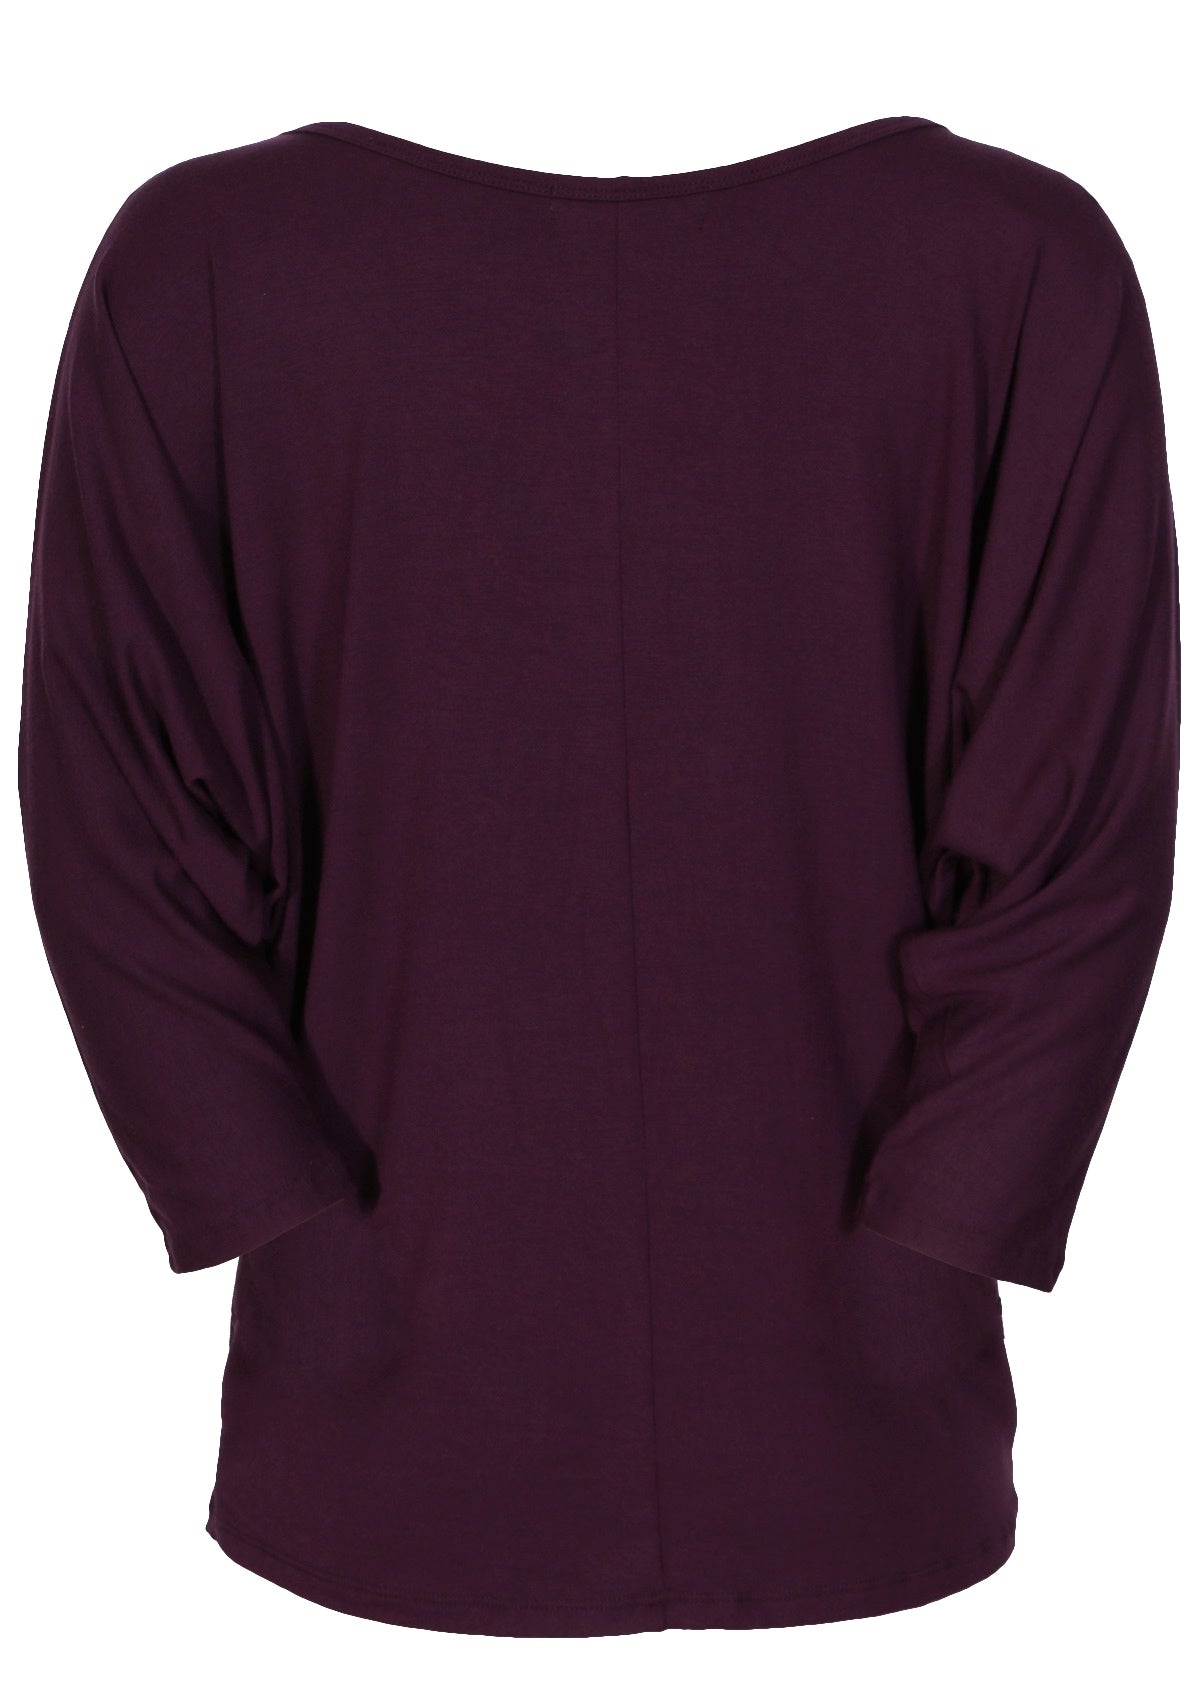 Back view of a 3/4 sleeve rayon batwing round neckline purple top.